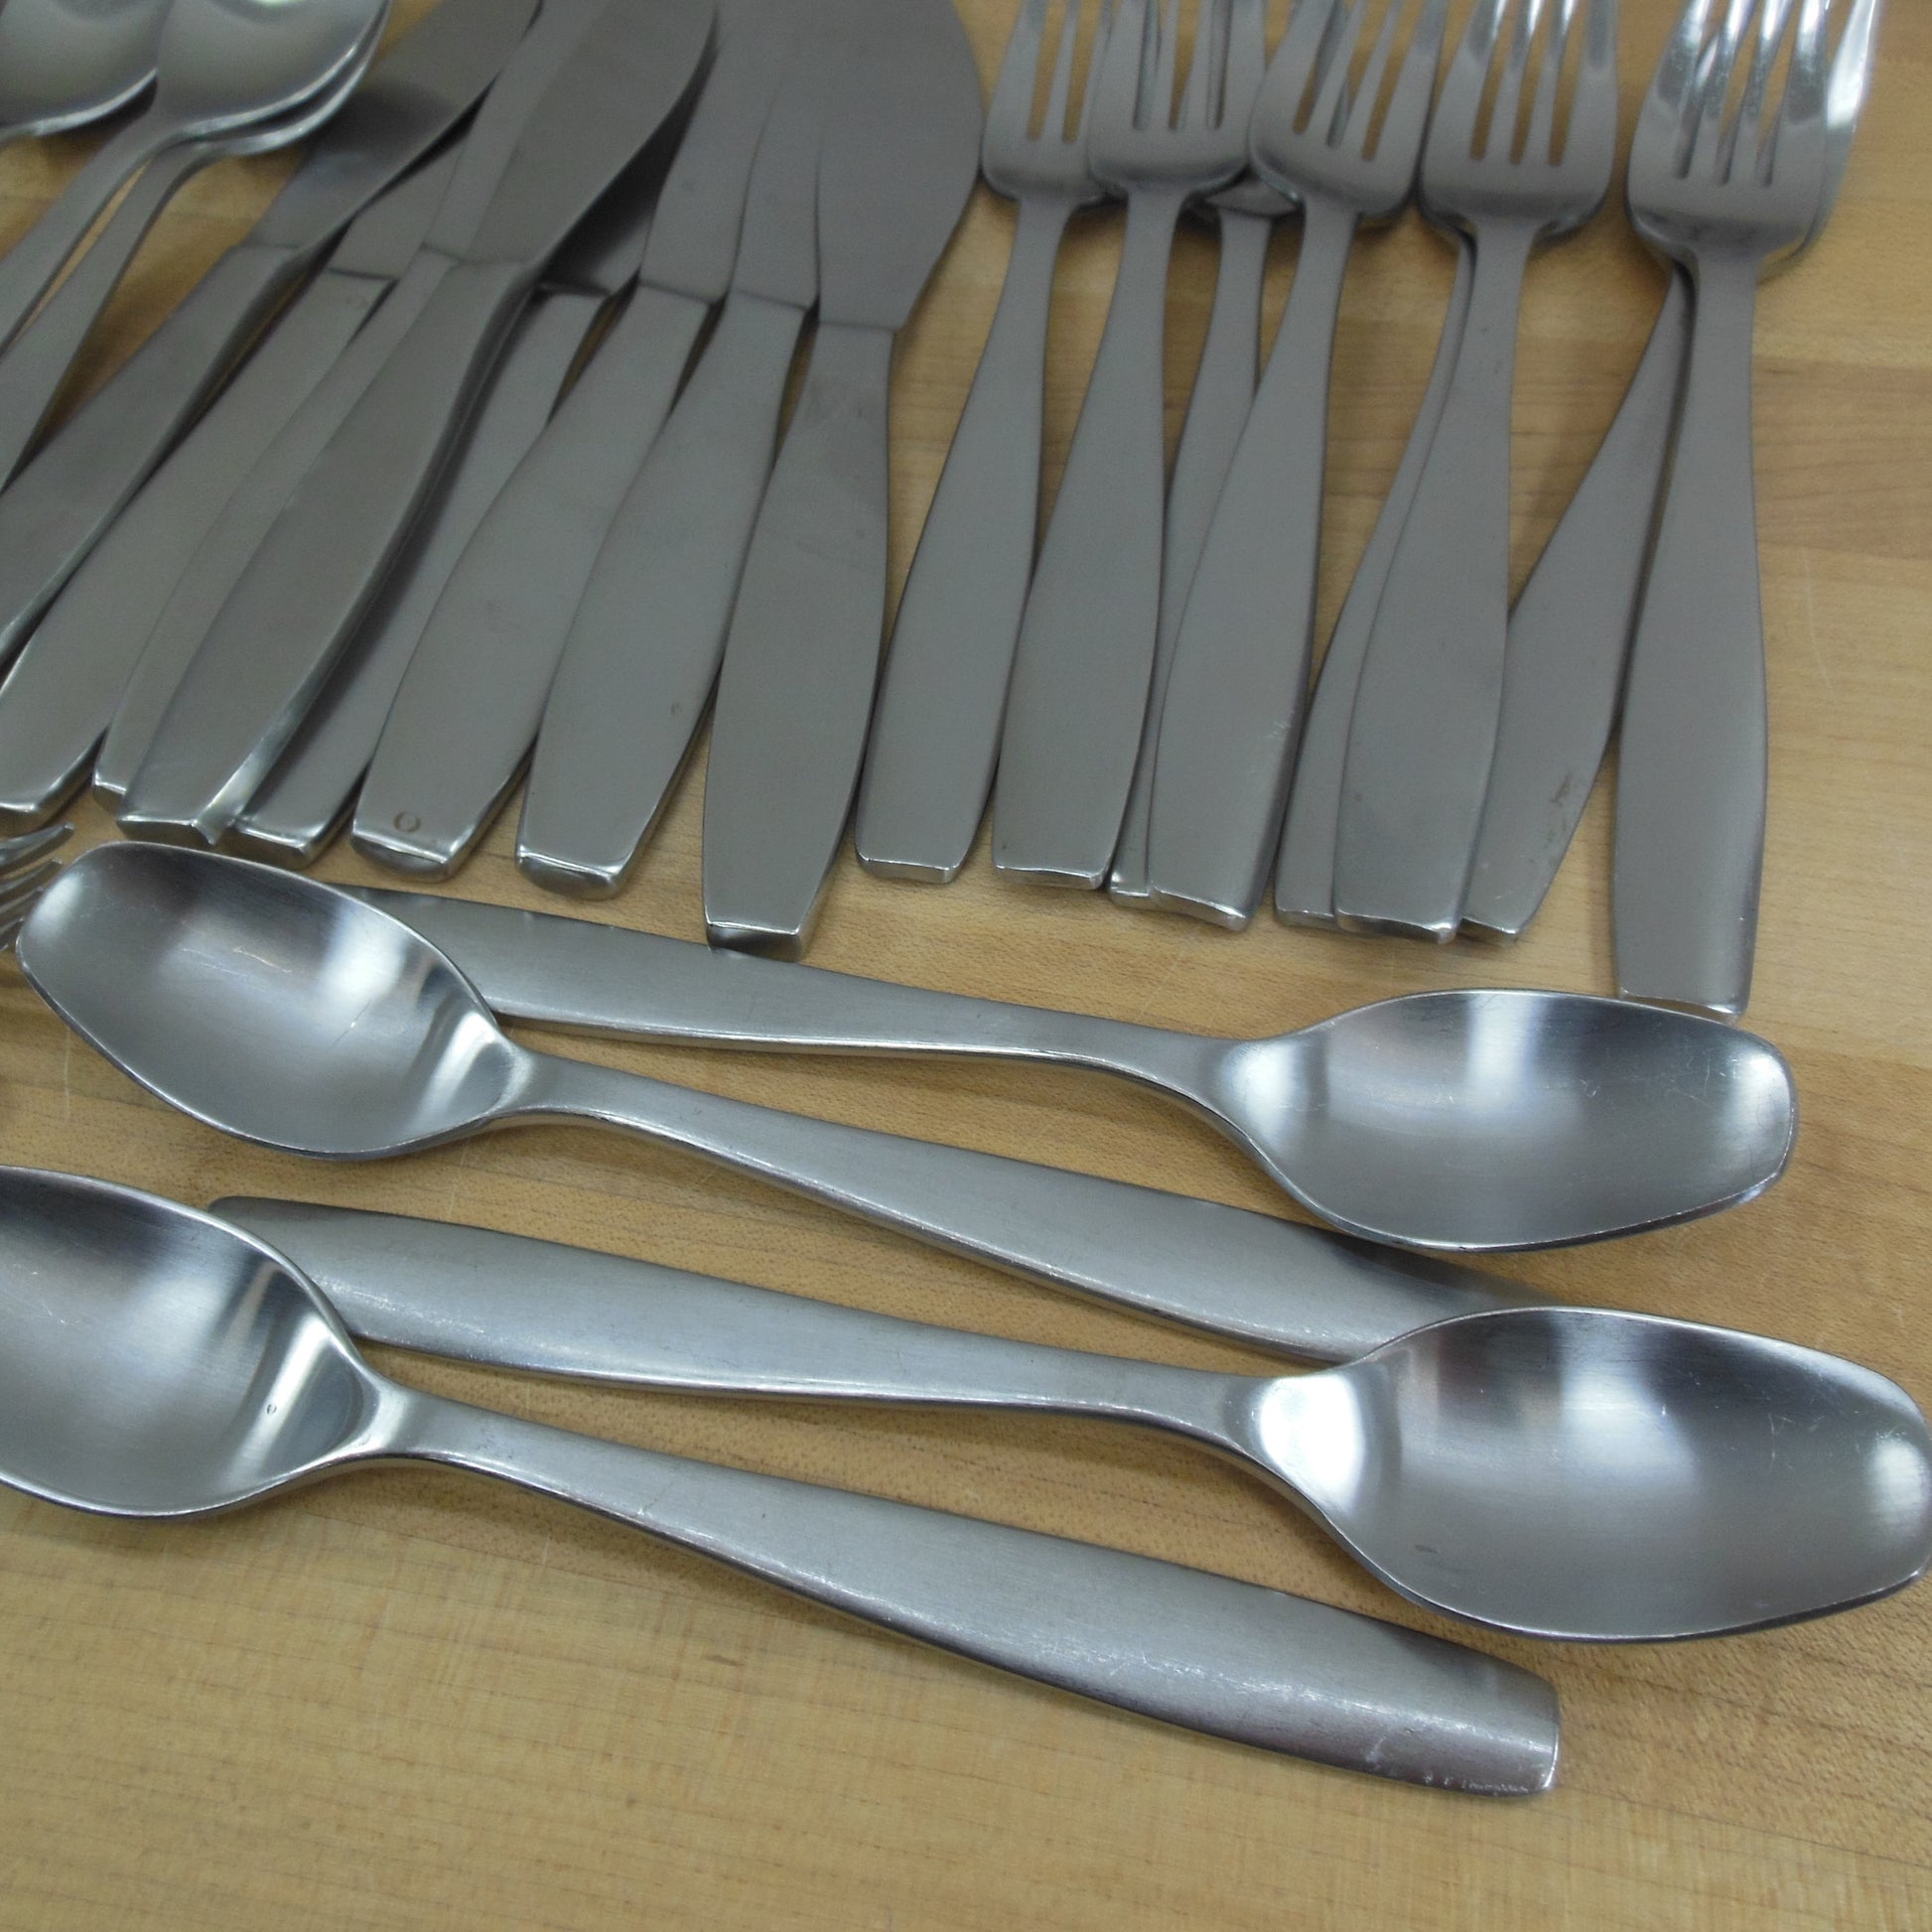 Gourmet Settings Non-Stop Stainless Flatware Partial Set 29 Pieces Used